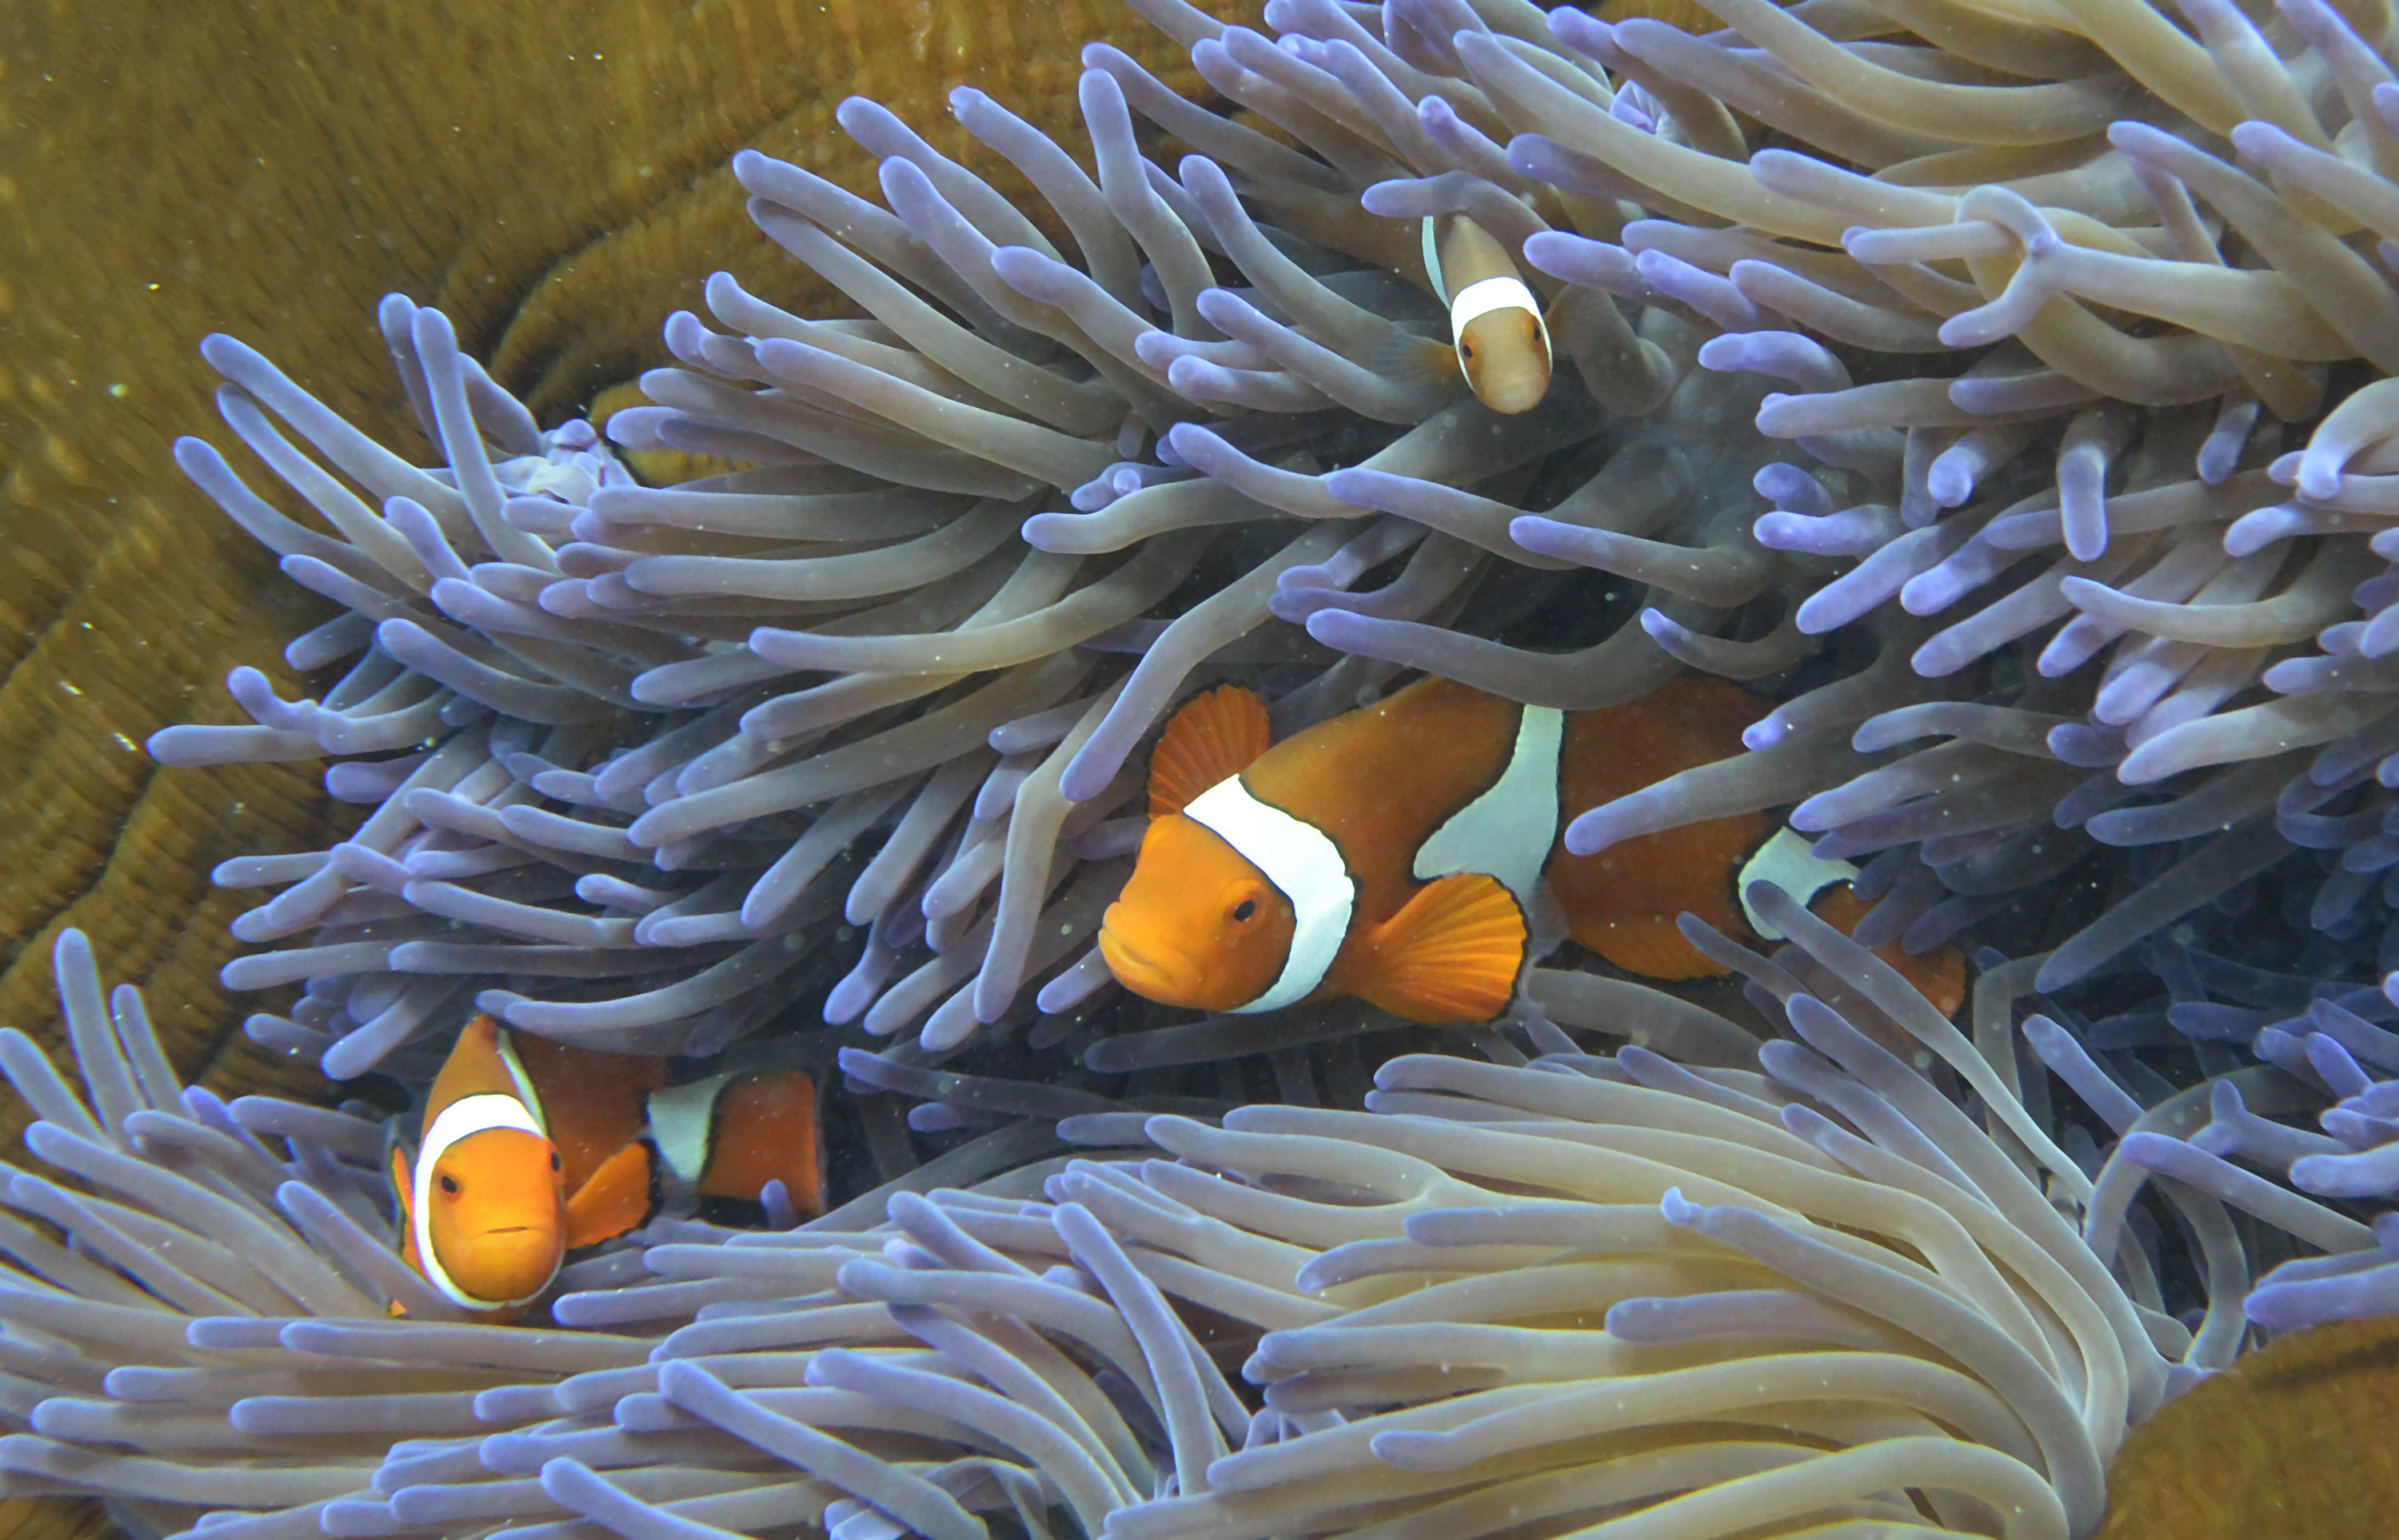 (FILES) This file photo taken on September 22, 2014, shows fish swimming through the coral on Australia's Great Barrier Reef.  Populations of marine mammals, birds, reptiles and fish have dropped by about half in the past four decades, with fish critical to human food suffering some of the greatest declines, WWF warned on September 16, 2015. In a new report, the conservation group cautioned that over-fishing, pollution and climate change had significantly shrunk the size of commercial fish stocks between 1970 and 2010.  AFP PHOTO/William WEST / AFP PHOTO / WILLIAM WEST